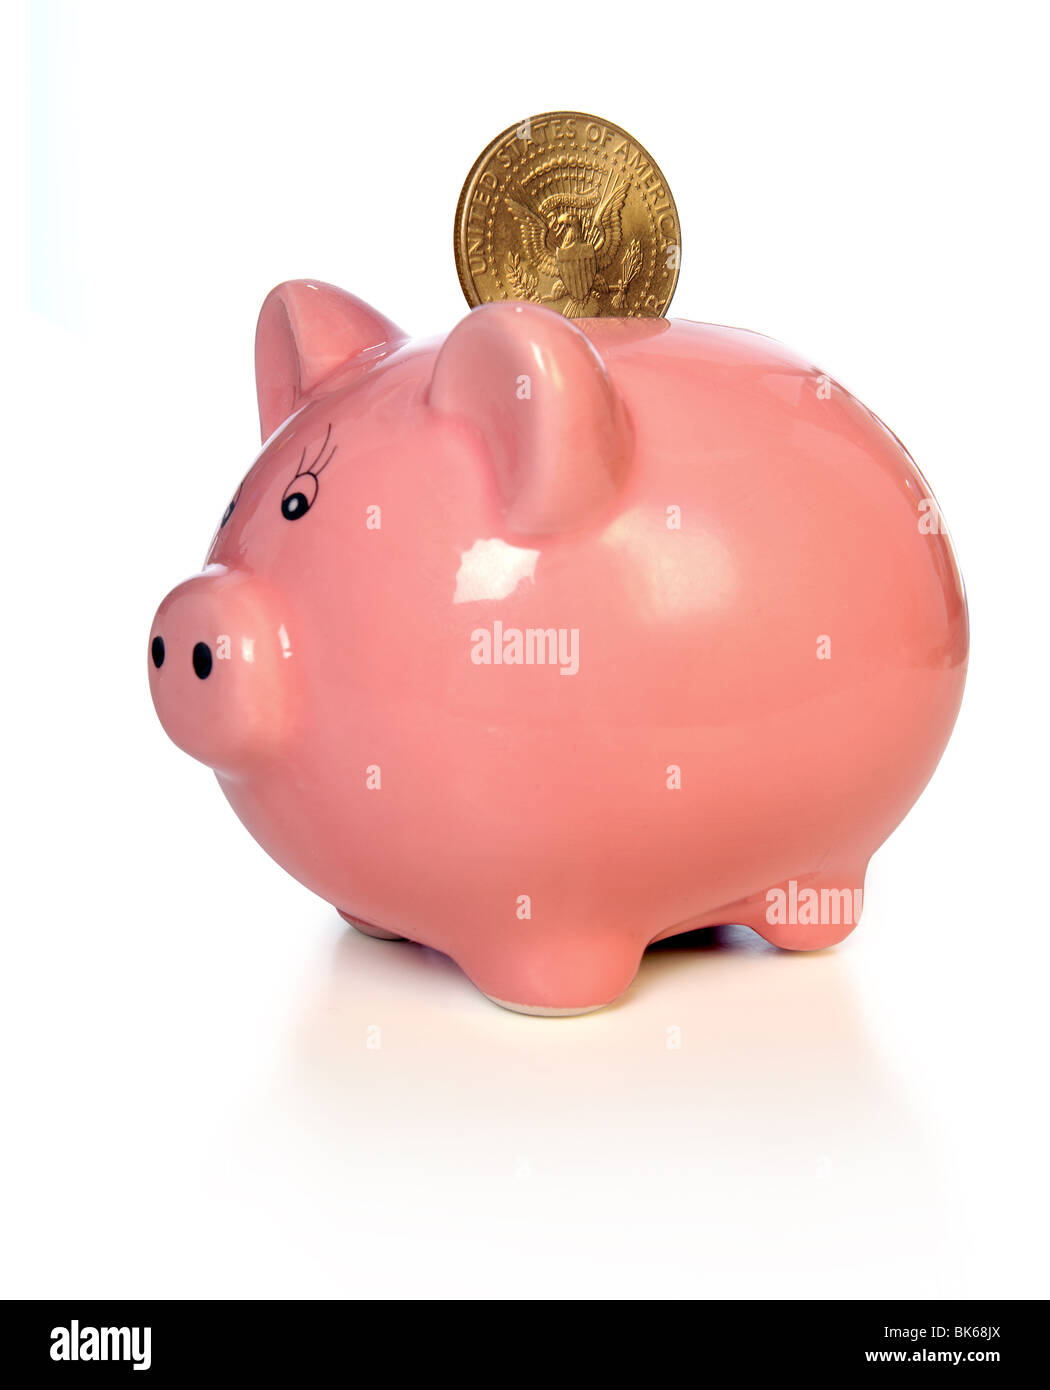 Piggy bank with gold coin over white background - Focus on coin Stock Photo